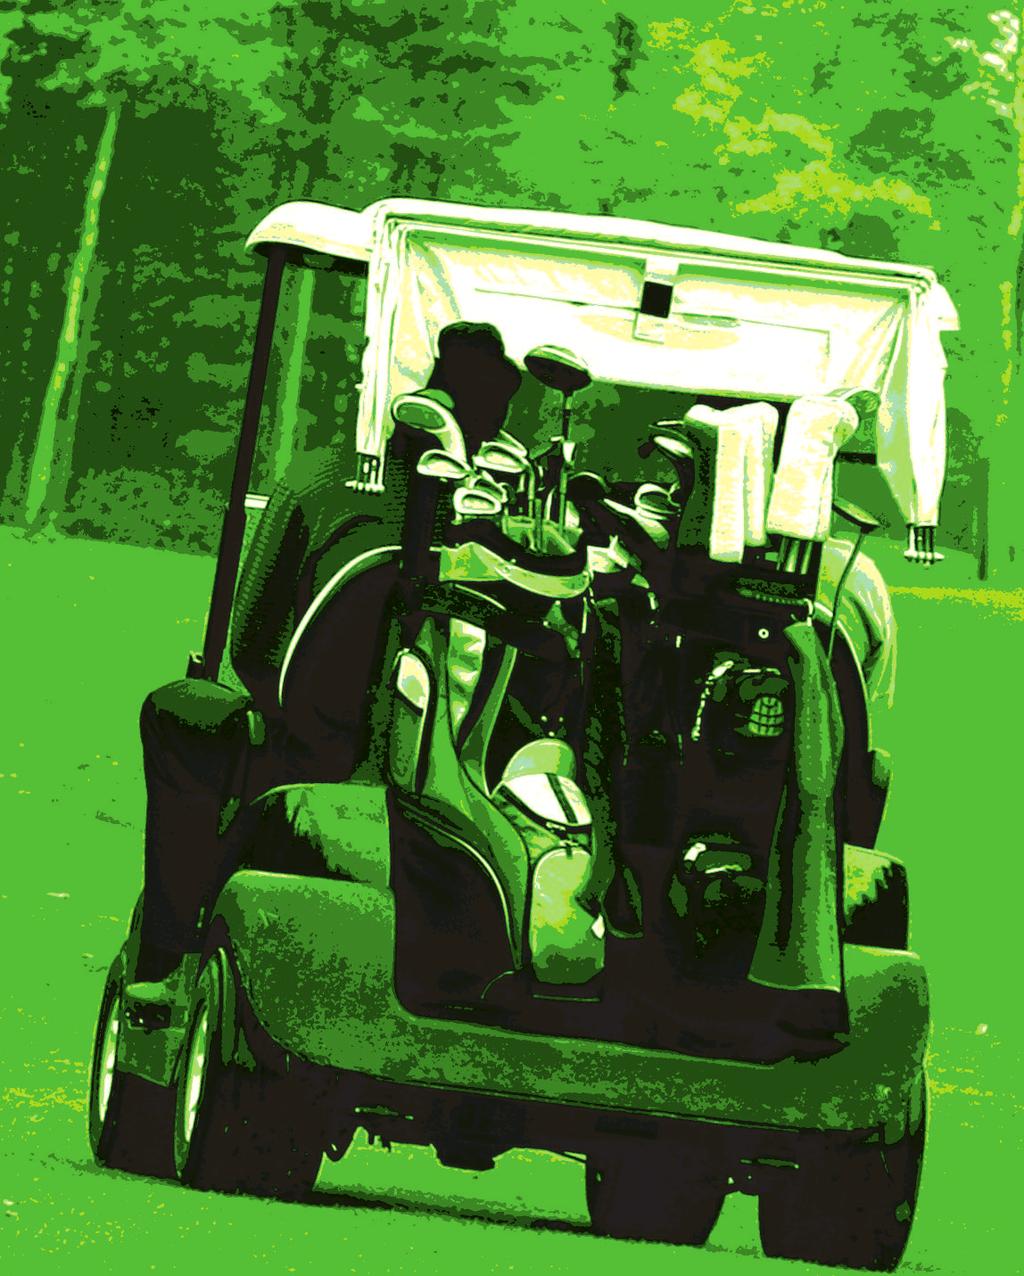 Lawn, Garden and Golf A wide selection of turf proven, purpose-designed tread offerings coupled with application-based, puncture resistant